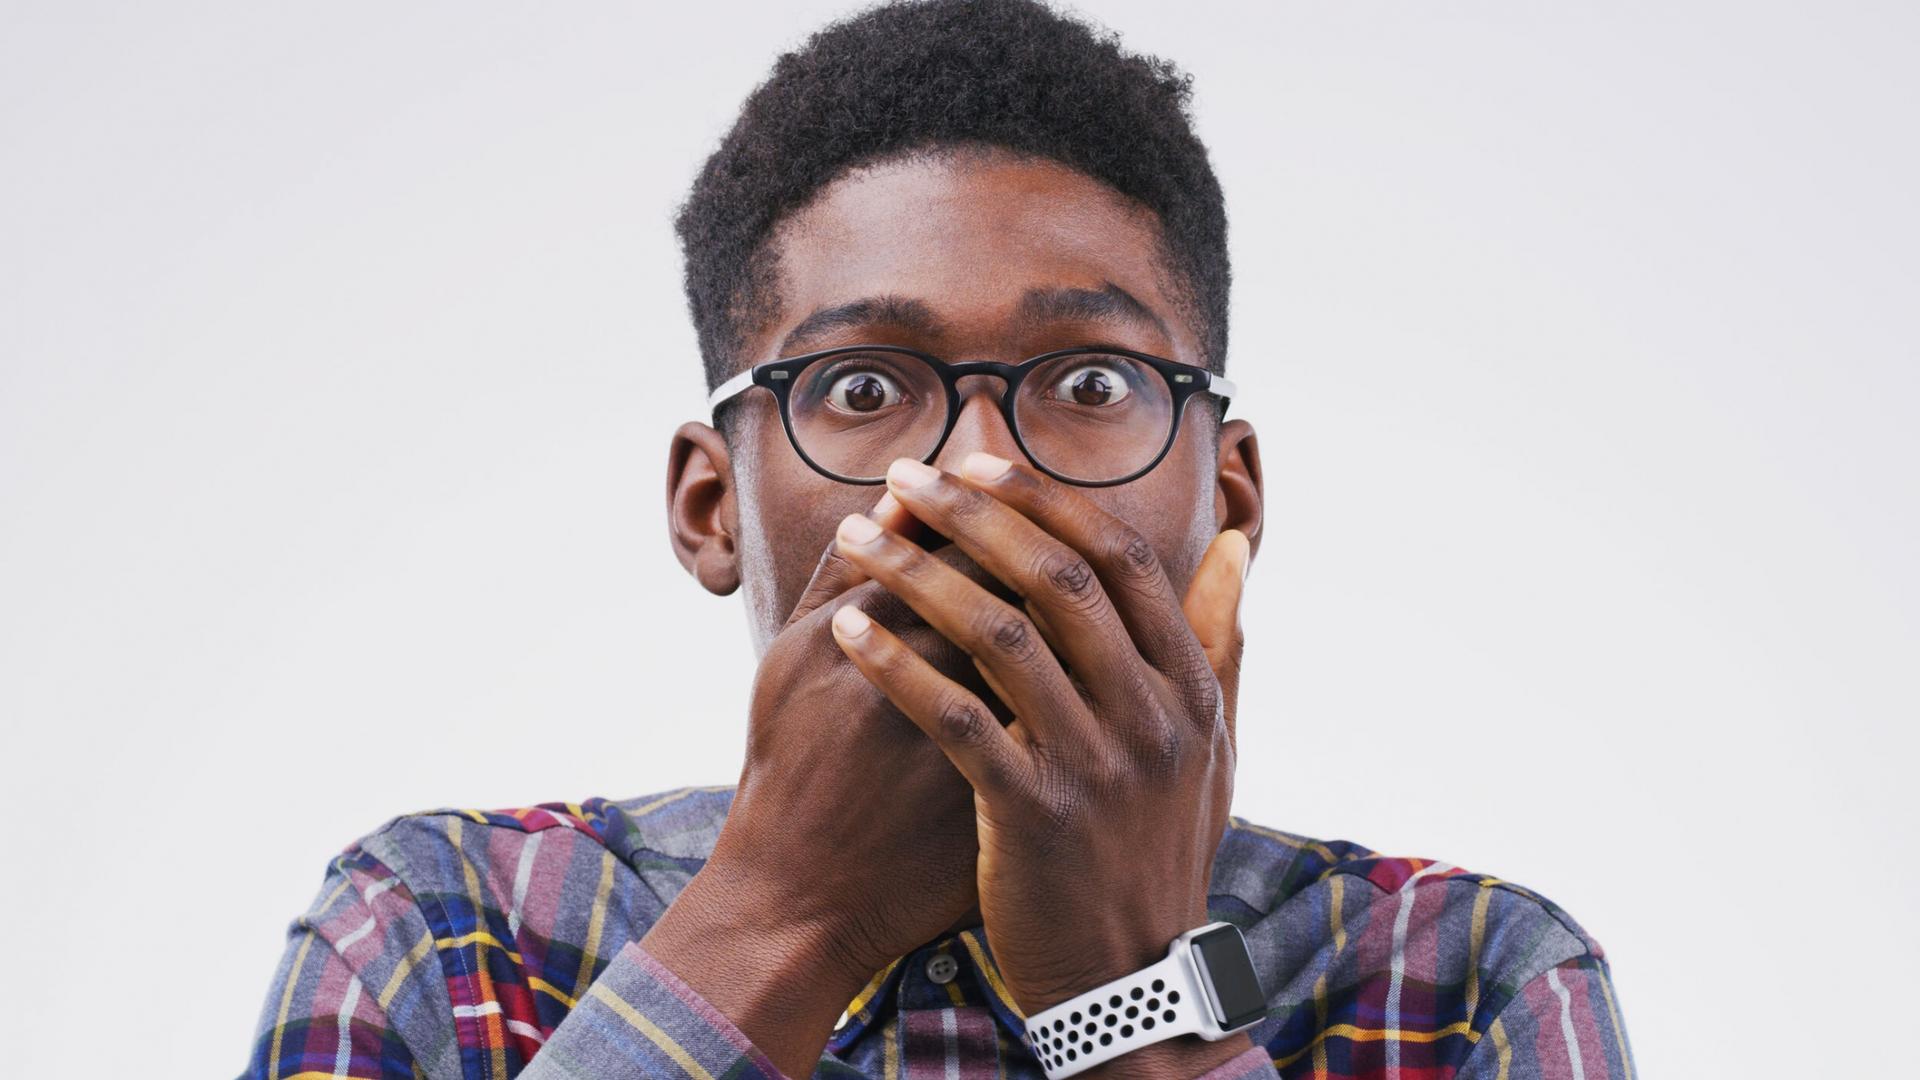 A man poses for the camera with his hands over his mouth in this stock photo